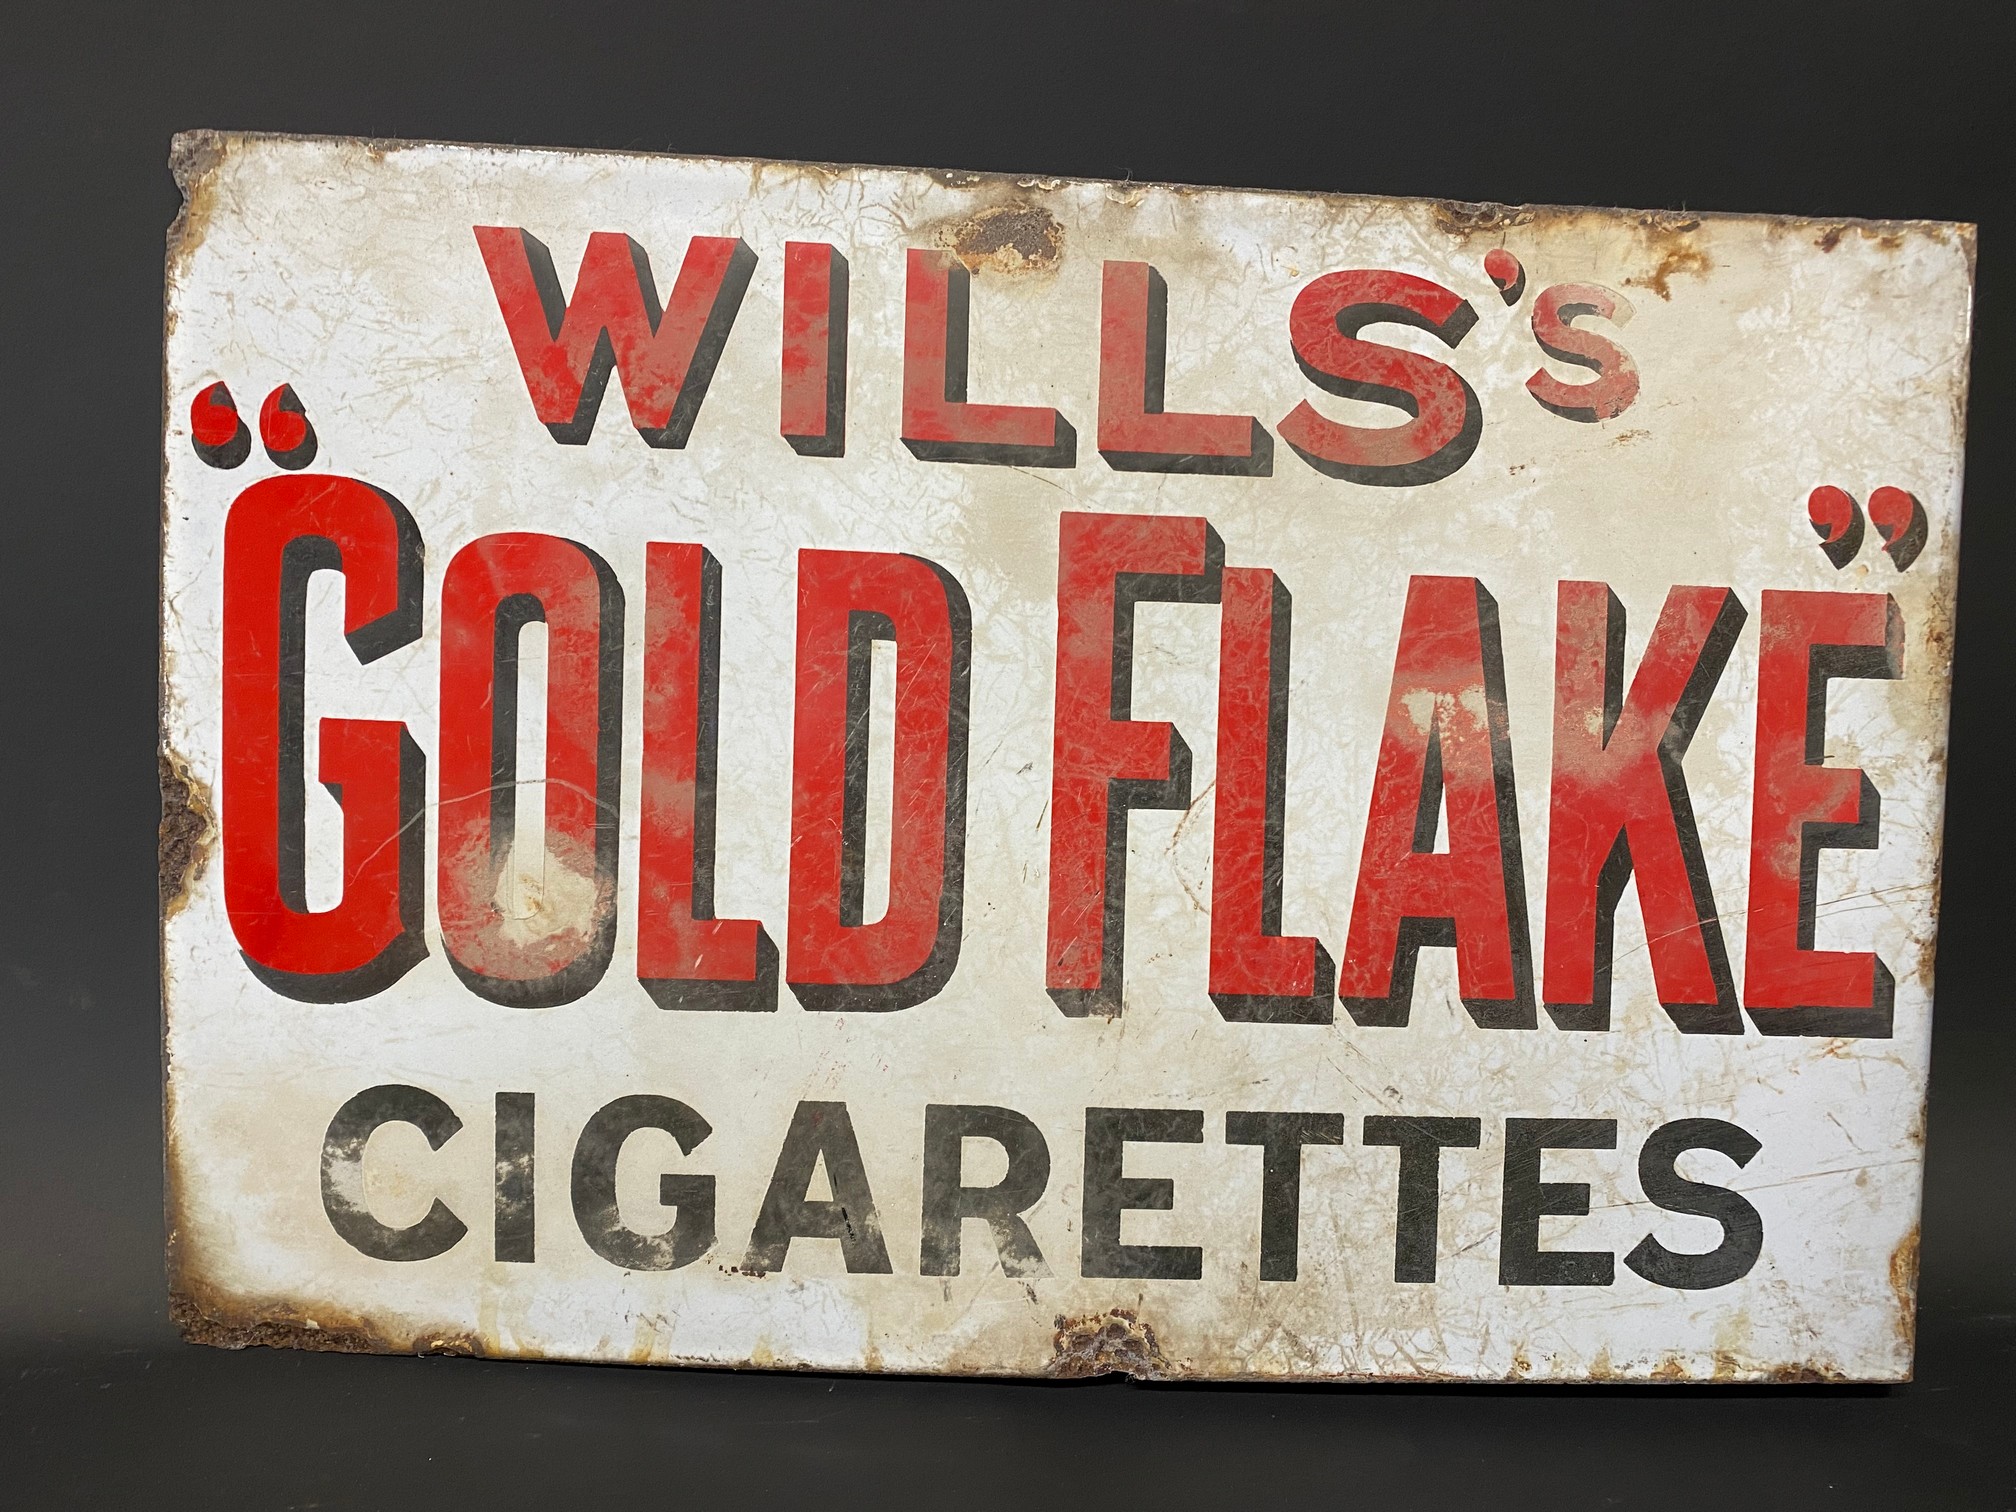 A Wills's Gold Flake Cigarettes double sided enamel sign with hanging flange, 18 x 12". - Image 2 of 3